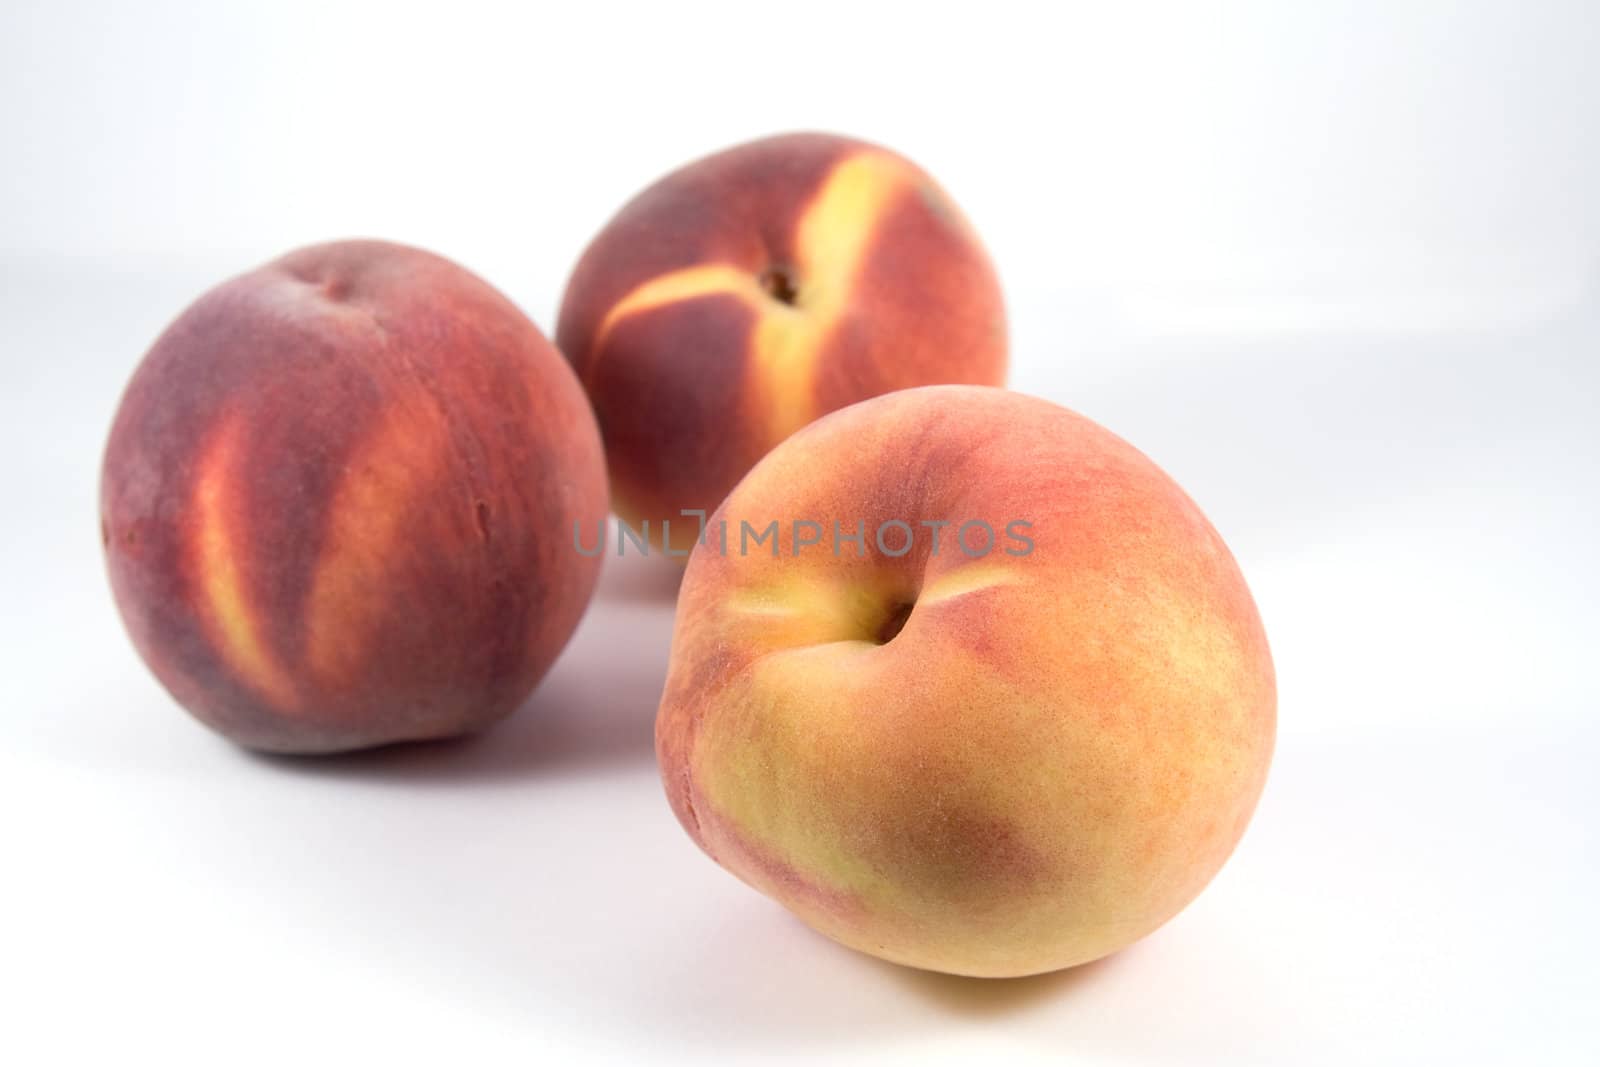 Three ripe peaches on white background. Focus on foreground one